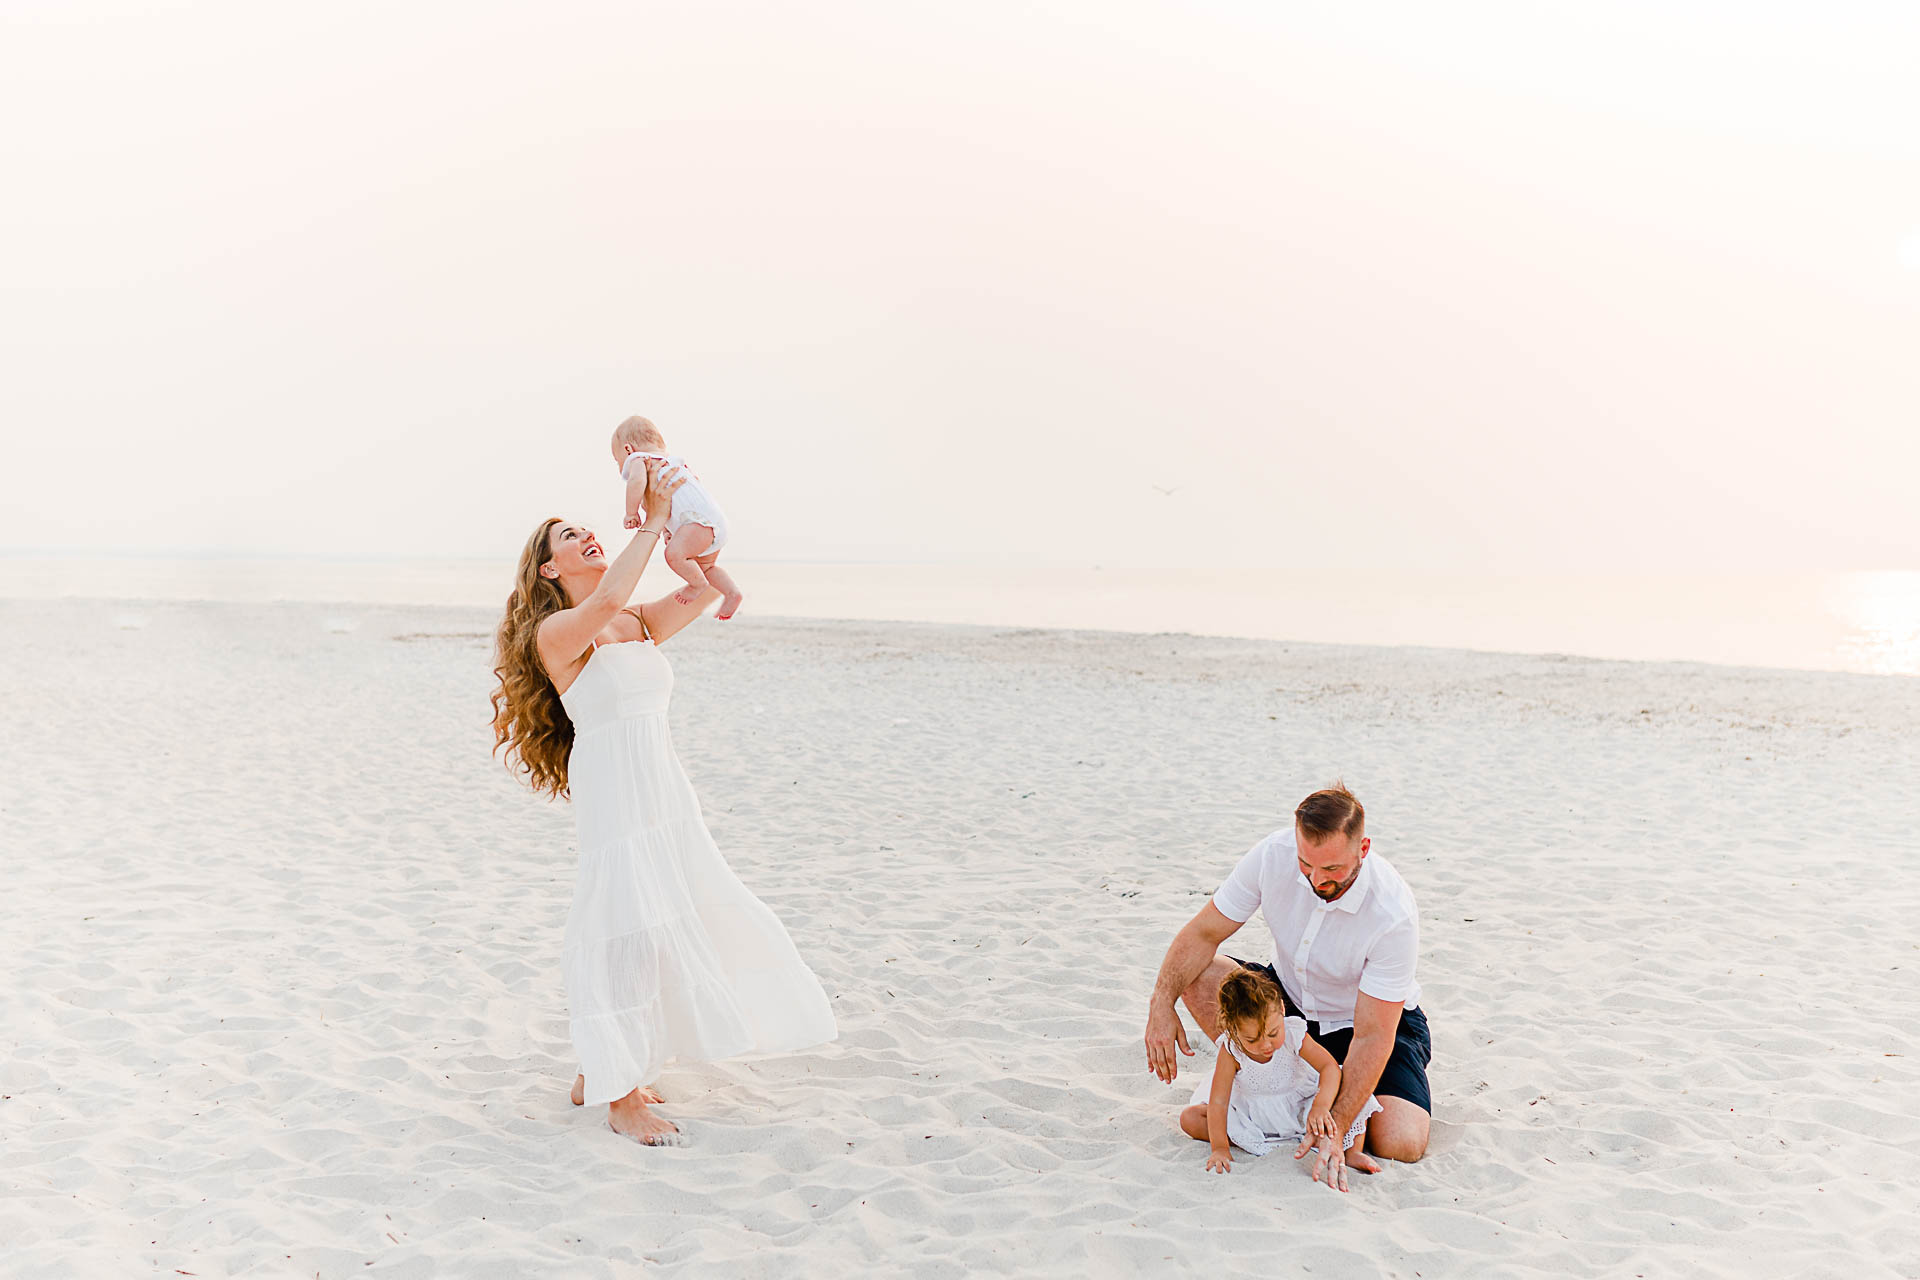 Photo by Cape Cod Family Photographer Christina Runnals | Mom spinning baby and dad playing in sand with daughter on beach